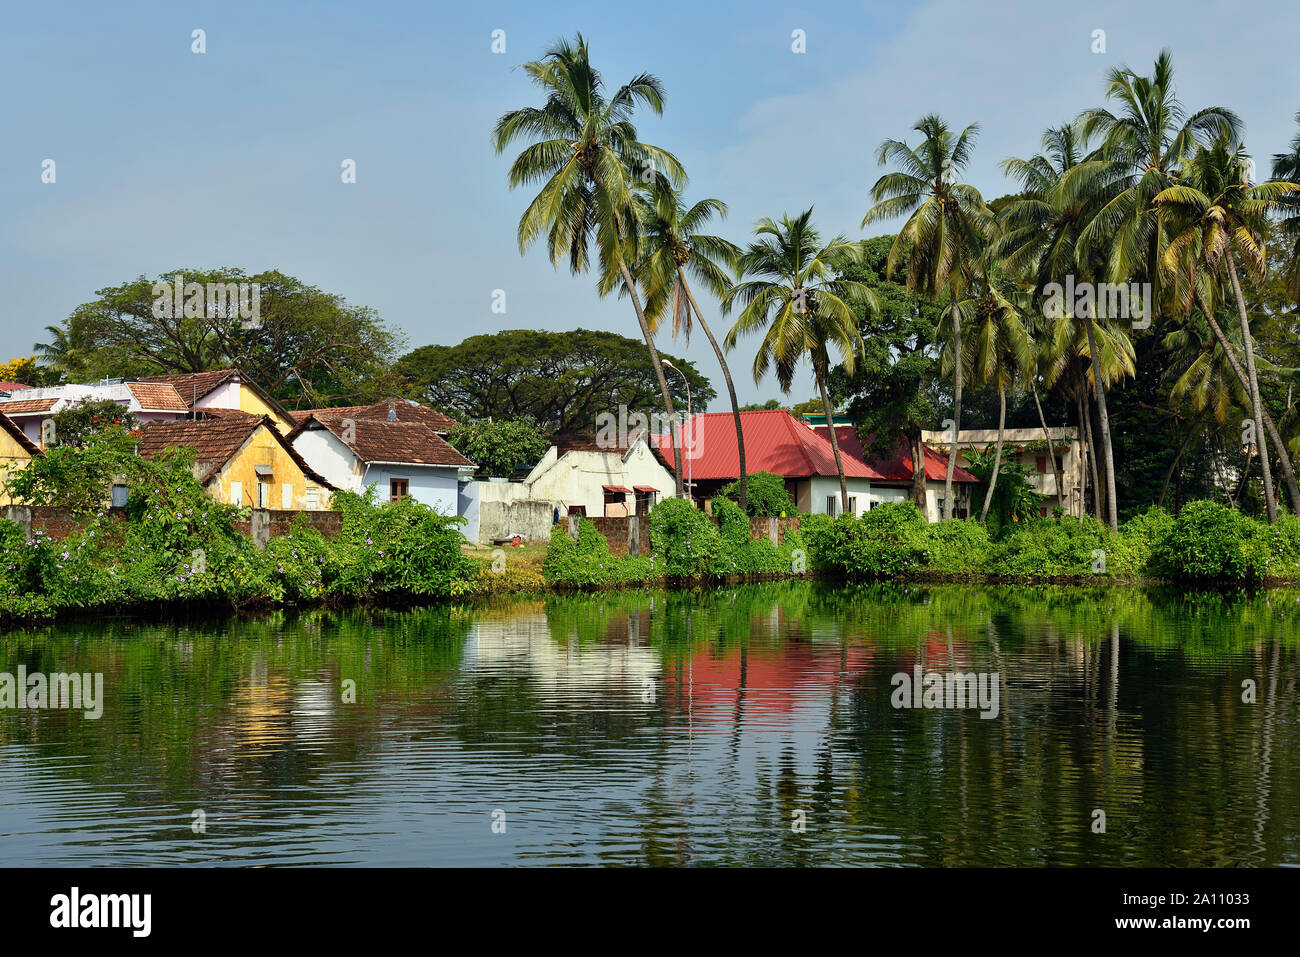 Traditional building development in Kochin, in the background reflecting the tropical flora in the water, Kerala - India. Stock Photo